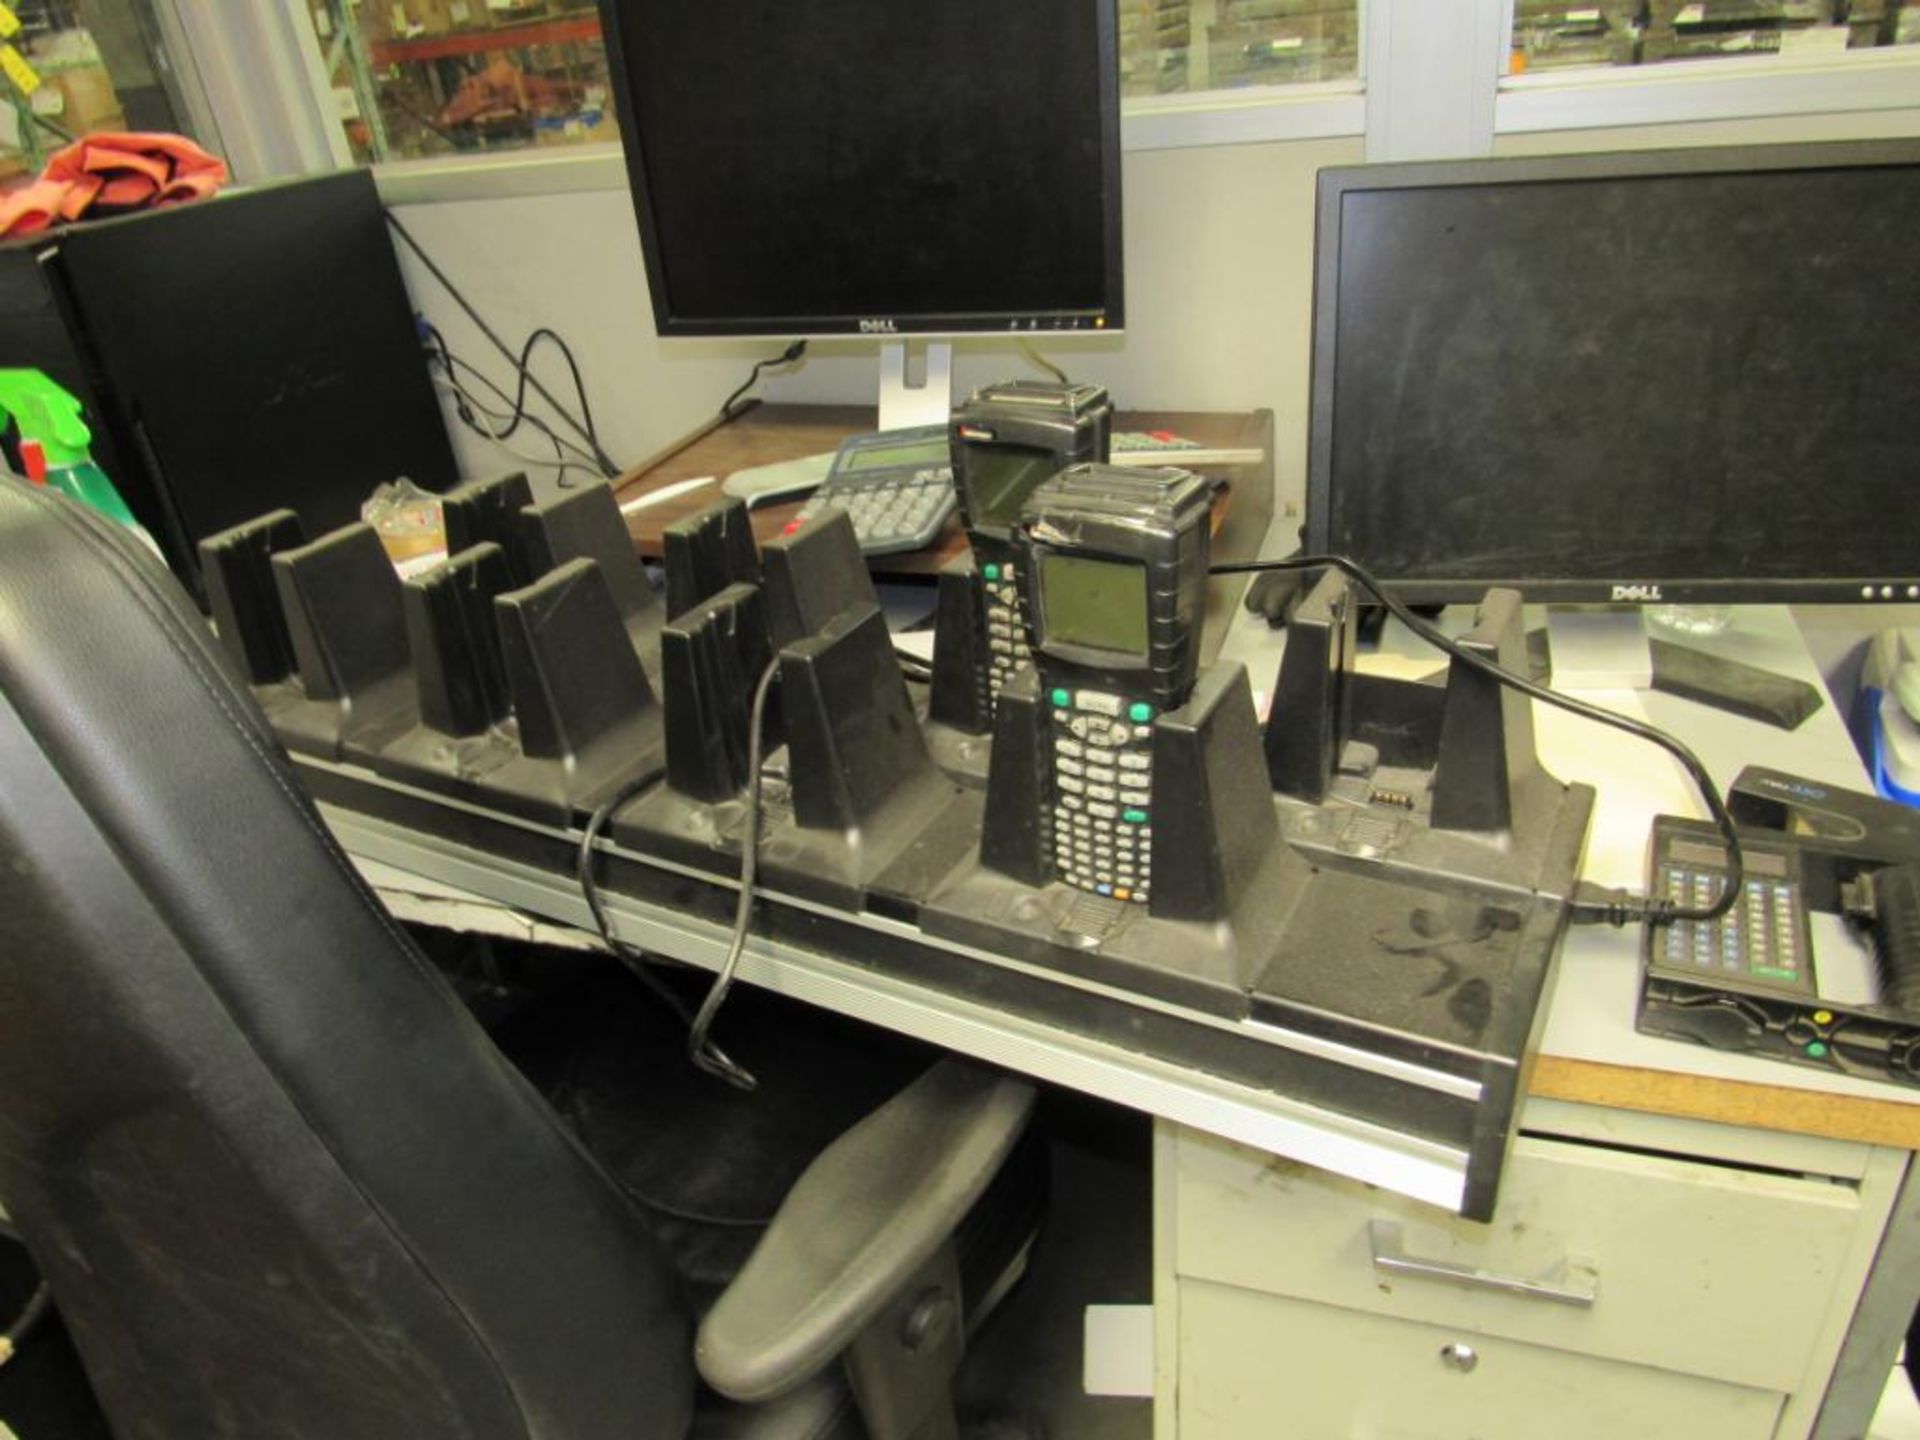 LOT: Assorted Radios, Chargers, Bar Code Readers, Batteries, etc. (Location F in Office) - Image 3 of 3